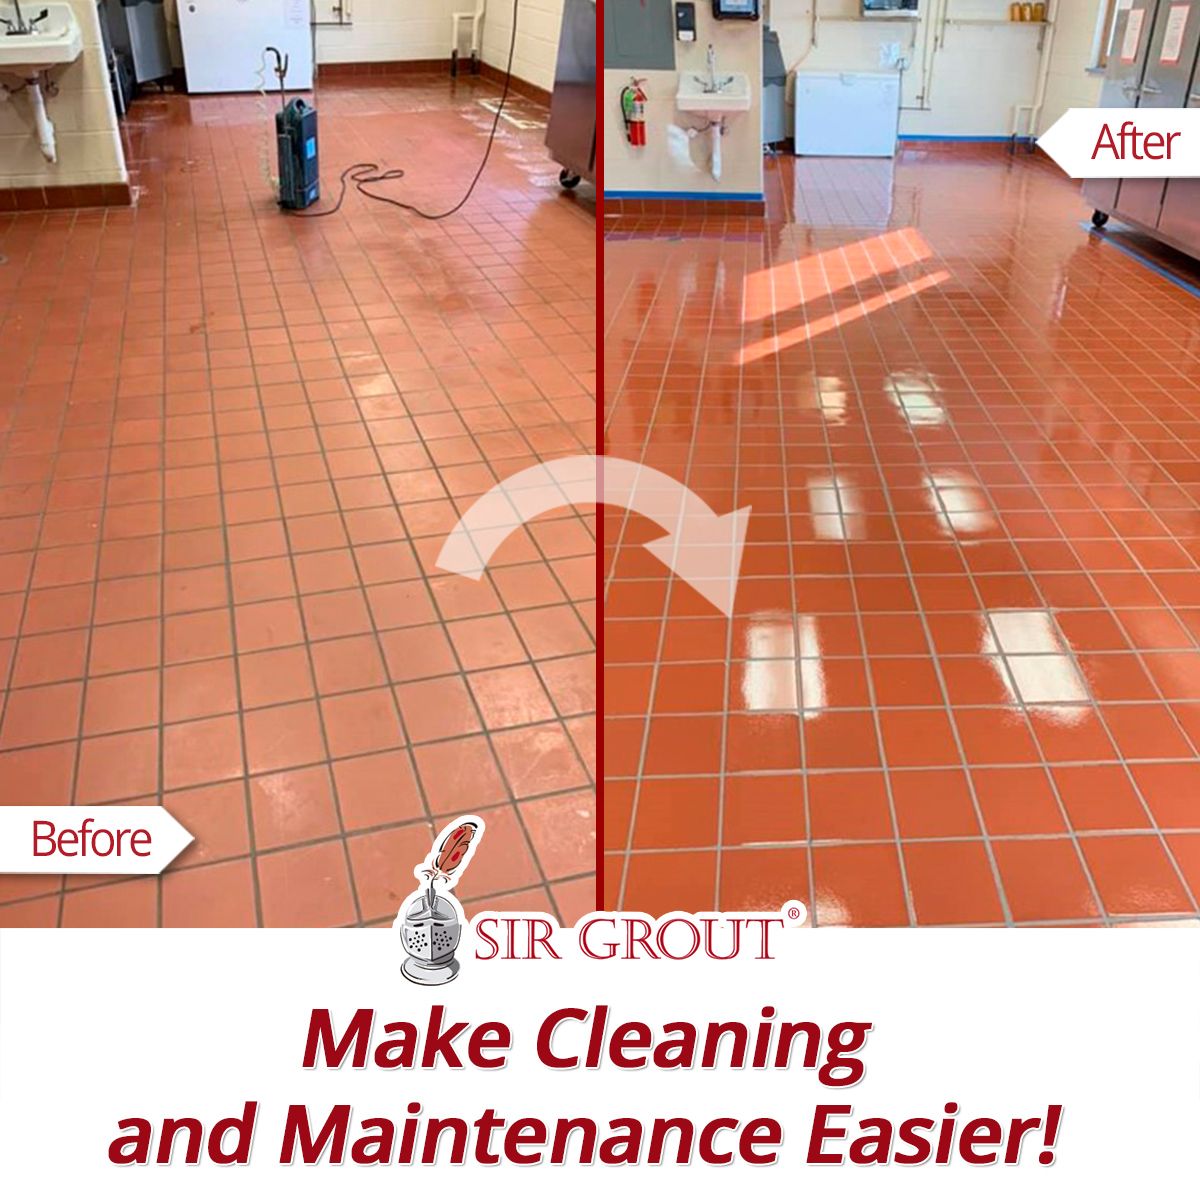 Make Cleaning and Maintenance Easier!